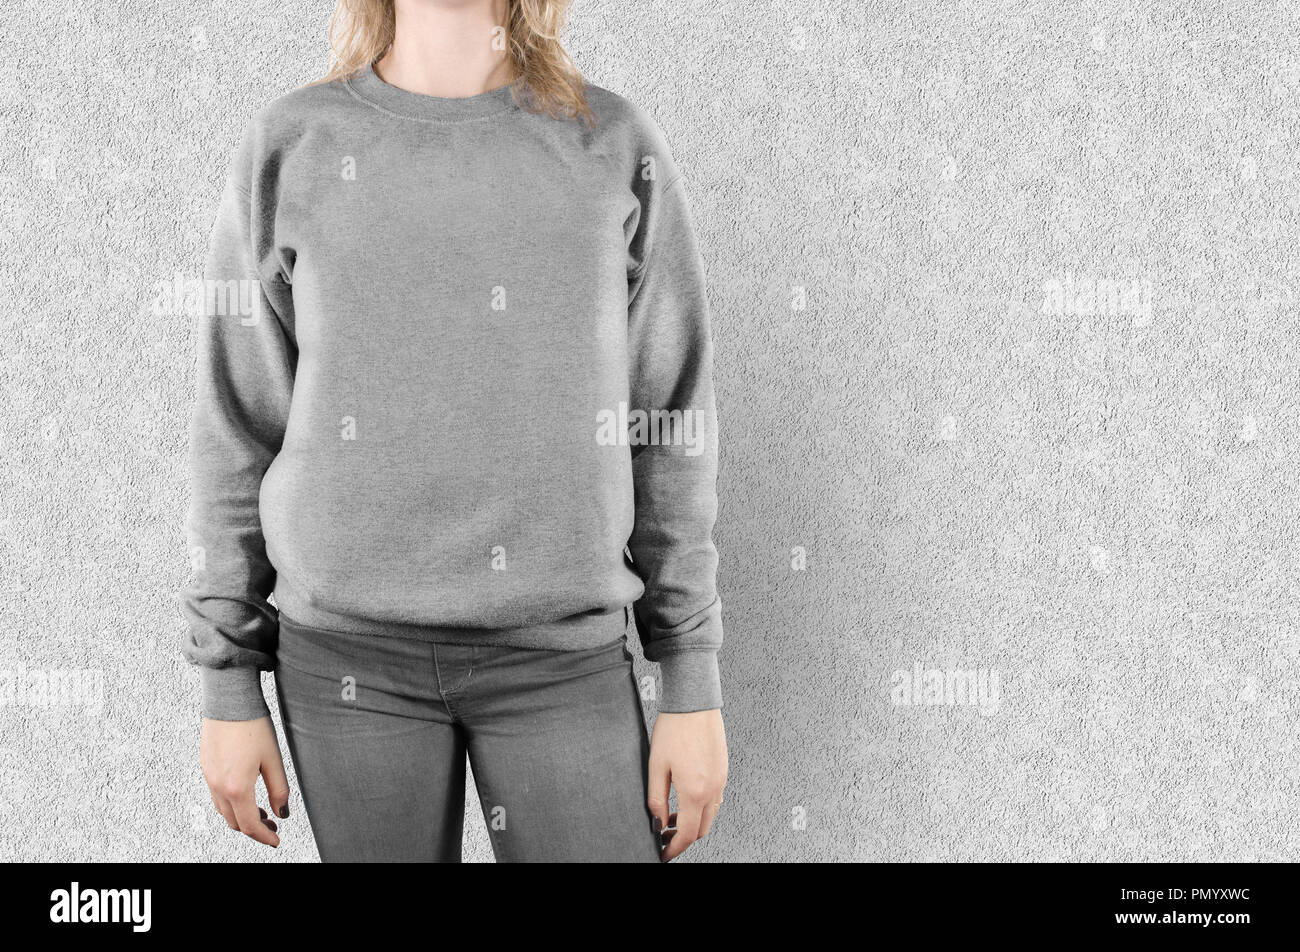 Blank Sweatshirt Mock Up Isolated Female Wear Plain Hoodie Mockup Empty Hoody Design Presentation Clear Loose Overall Model Pullover Ready For Pri Stock Photo Alamy